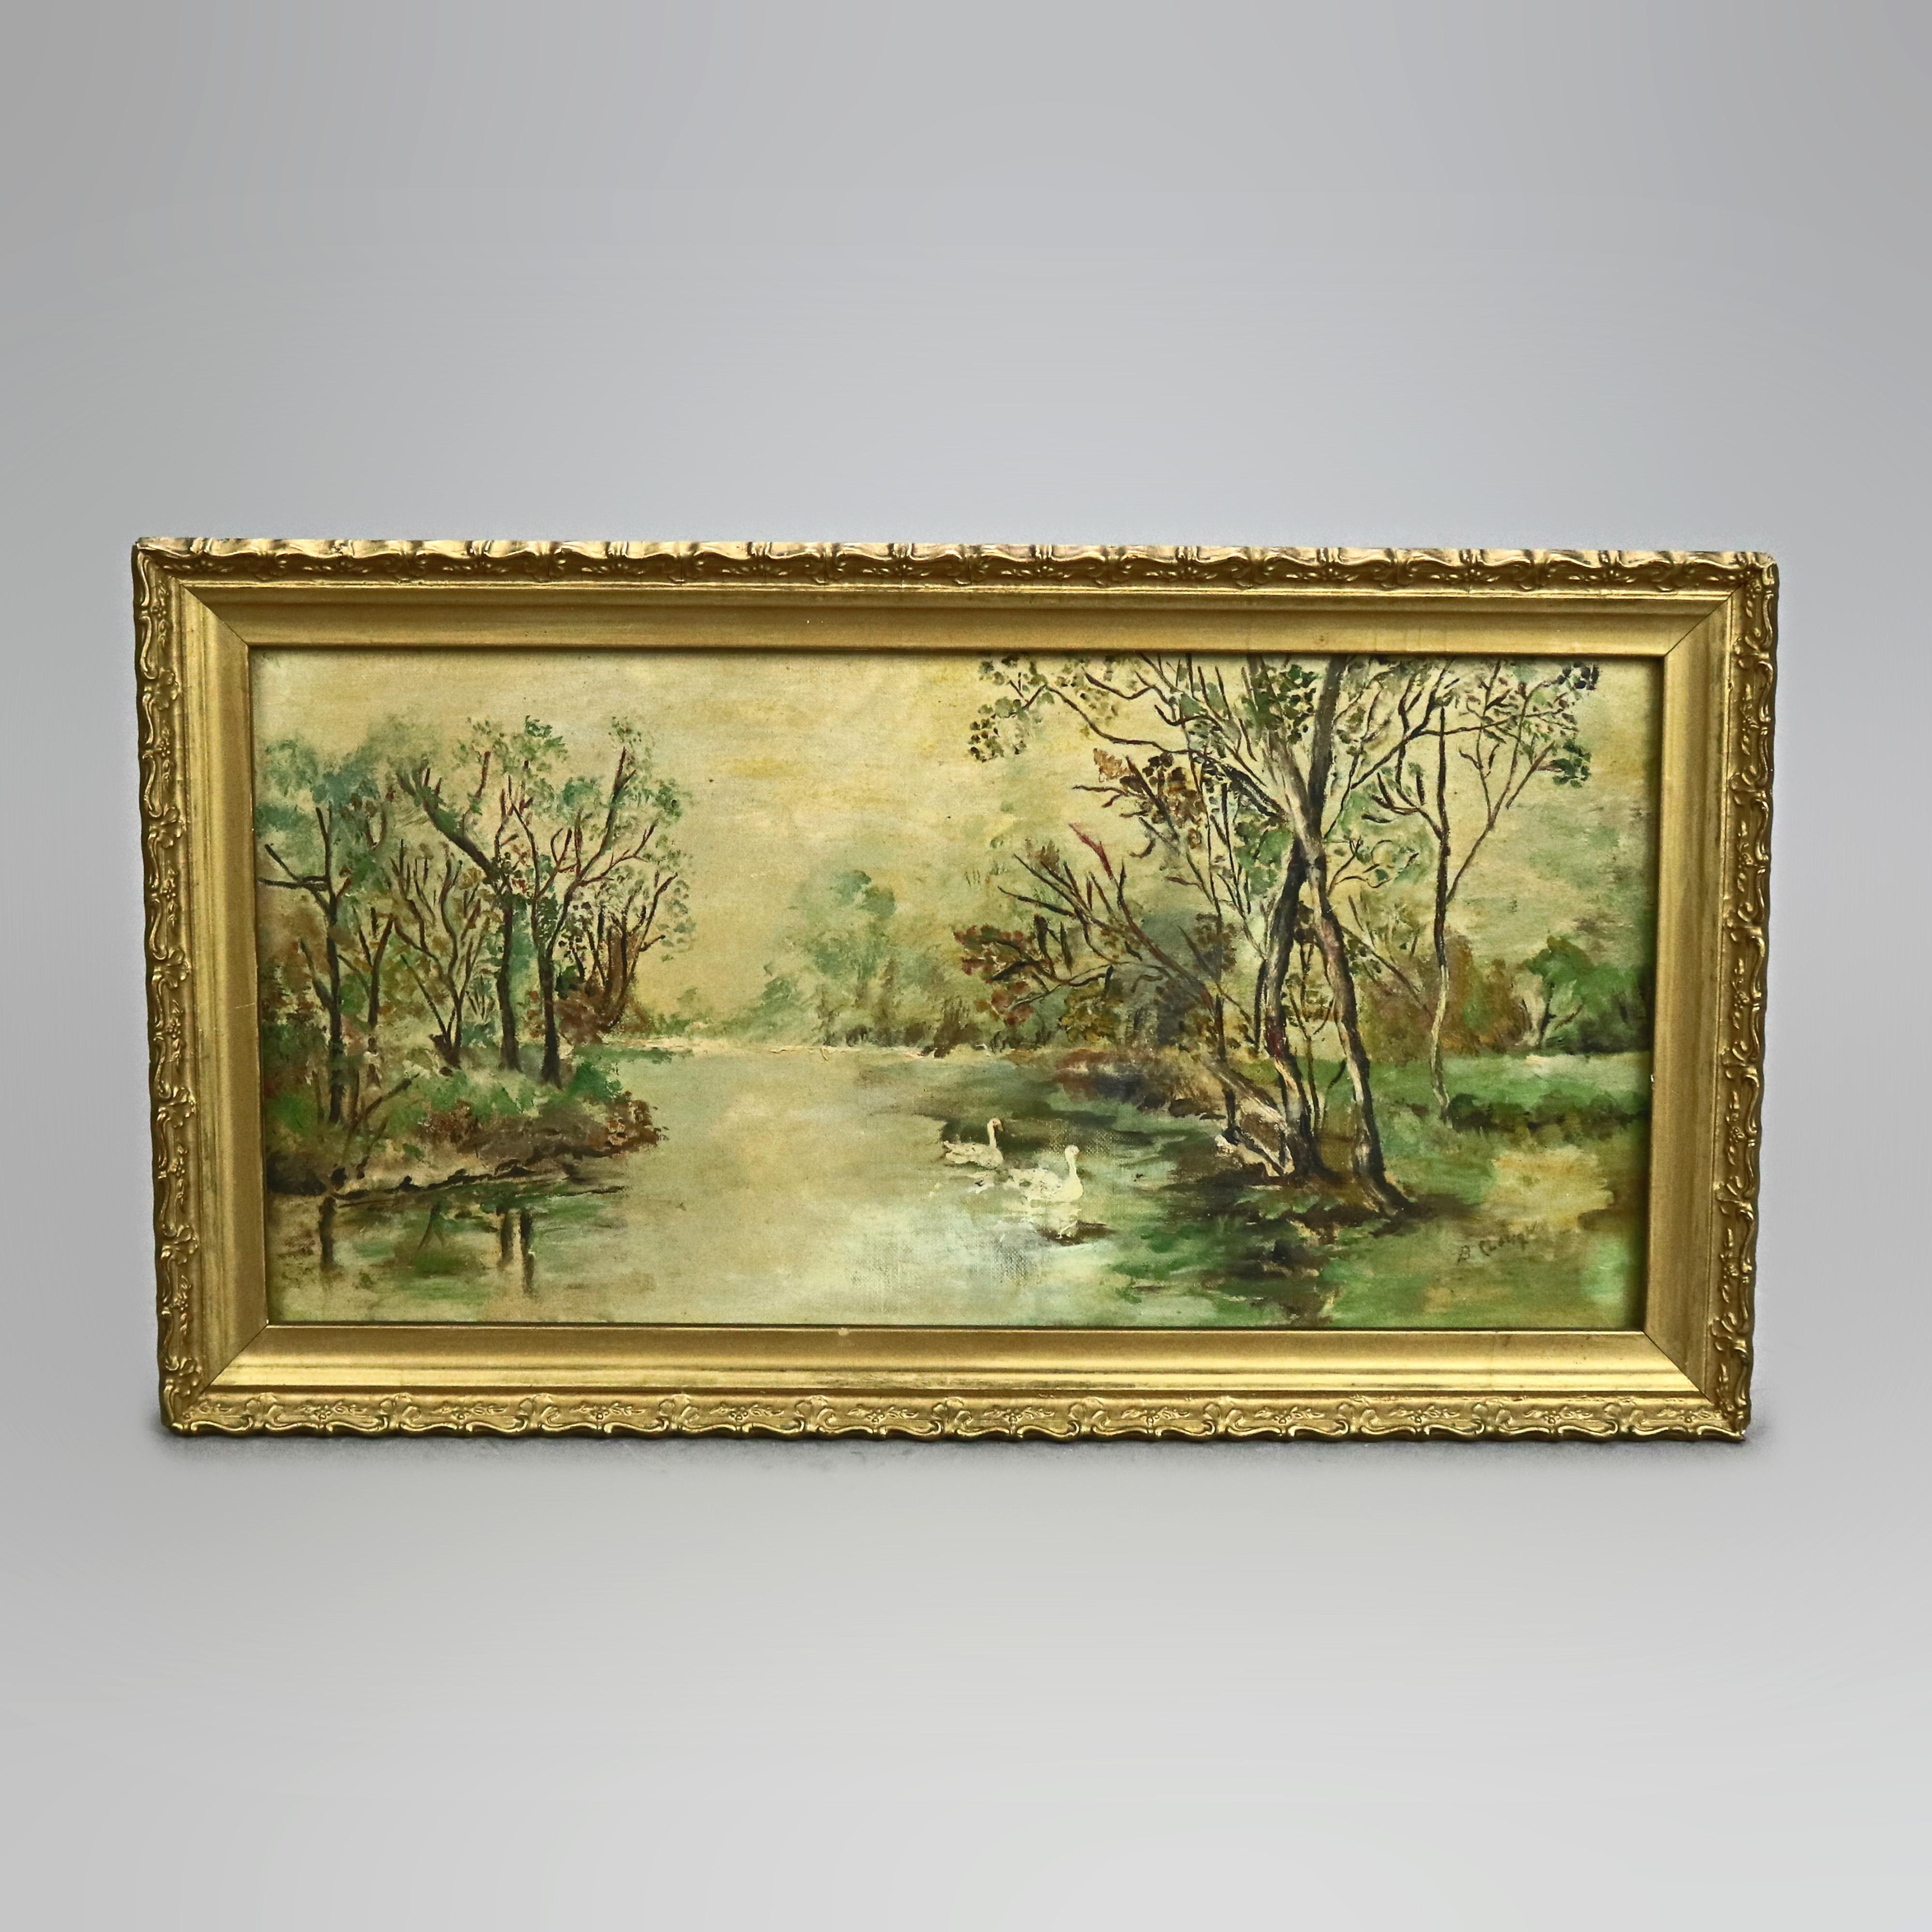 An antique landscape painting by Plough offers oil on canvas river scene, artist signed lower right, seated in giltwood frame, c1880

Measures - 9'' H x 16.5'' W x 1.5'' D; sight 15'' x 7.5''.